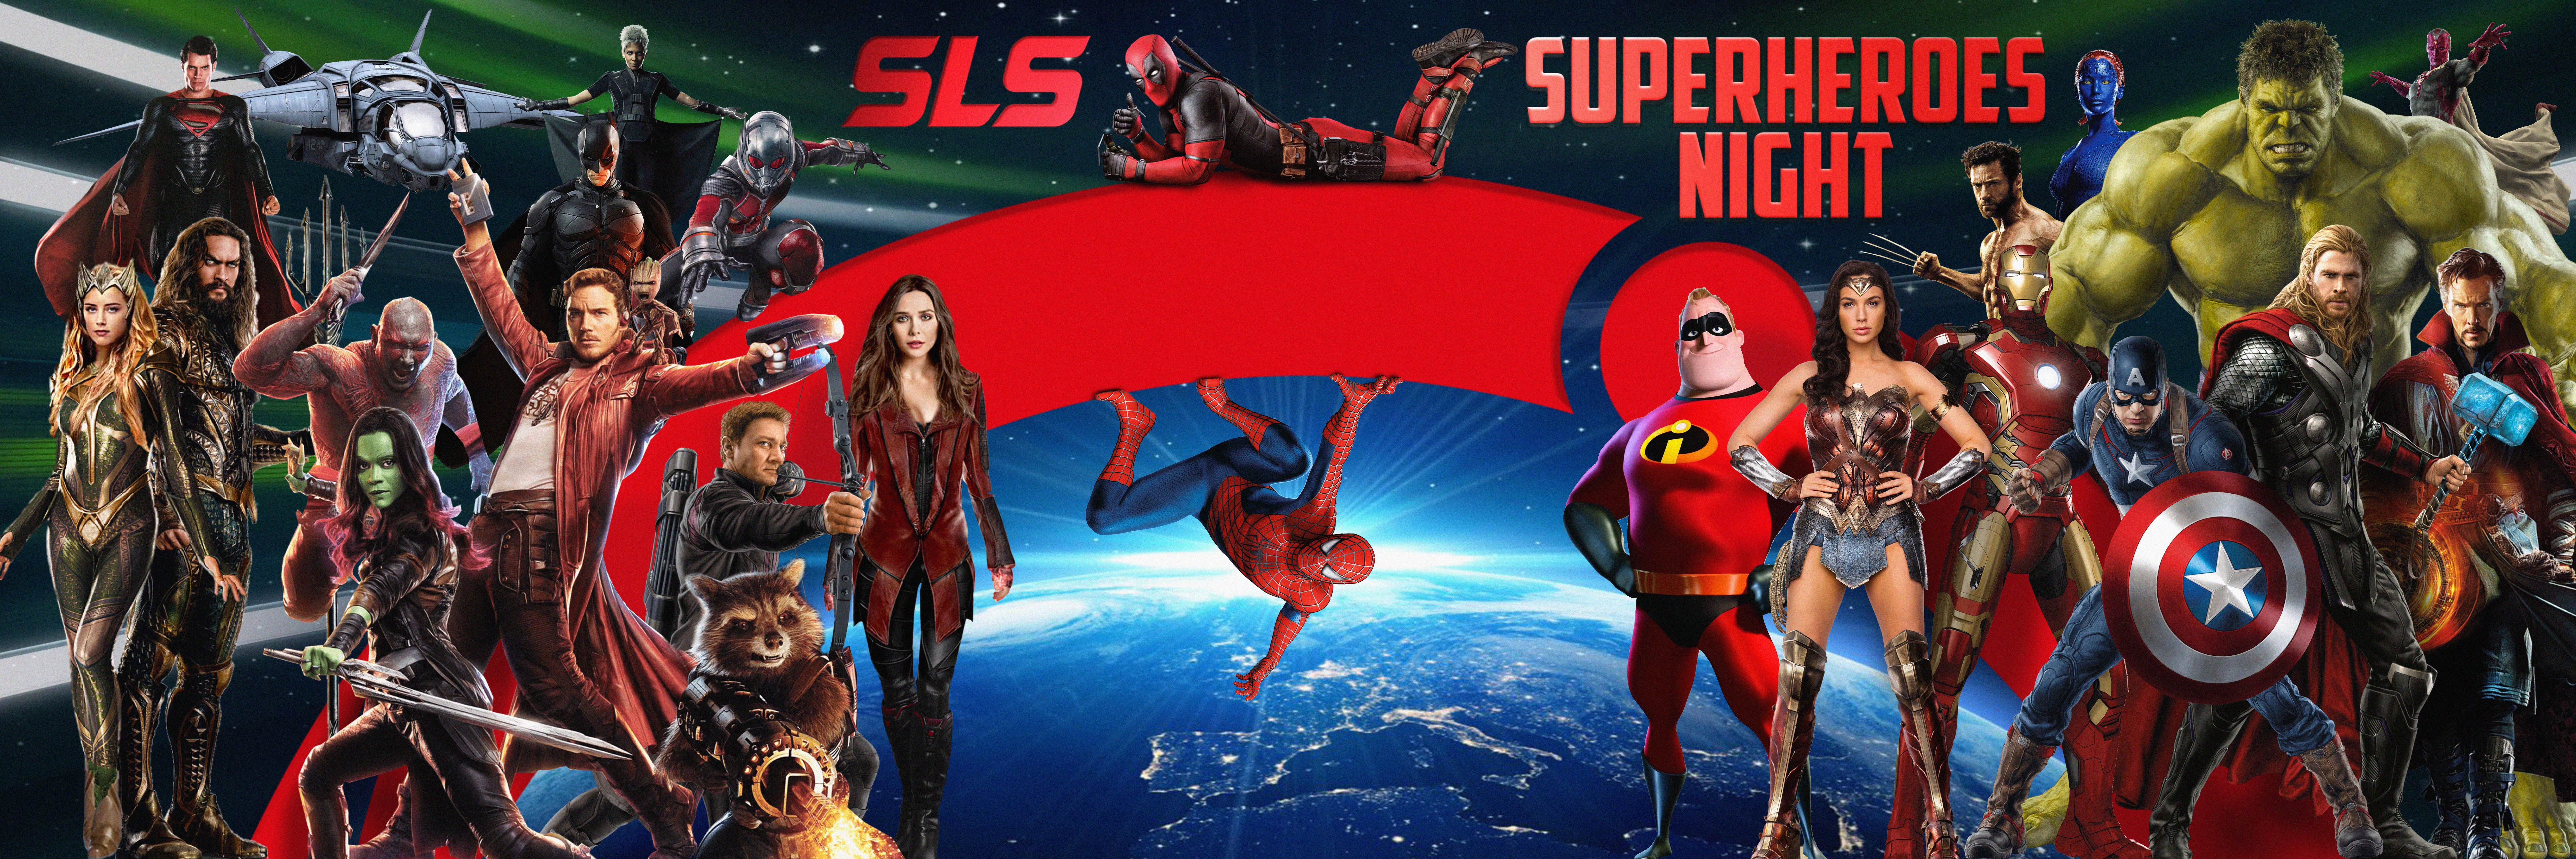 Image shows a poster of Superheros Night with different superhero characters in the background